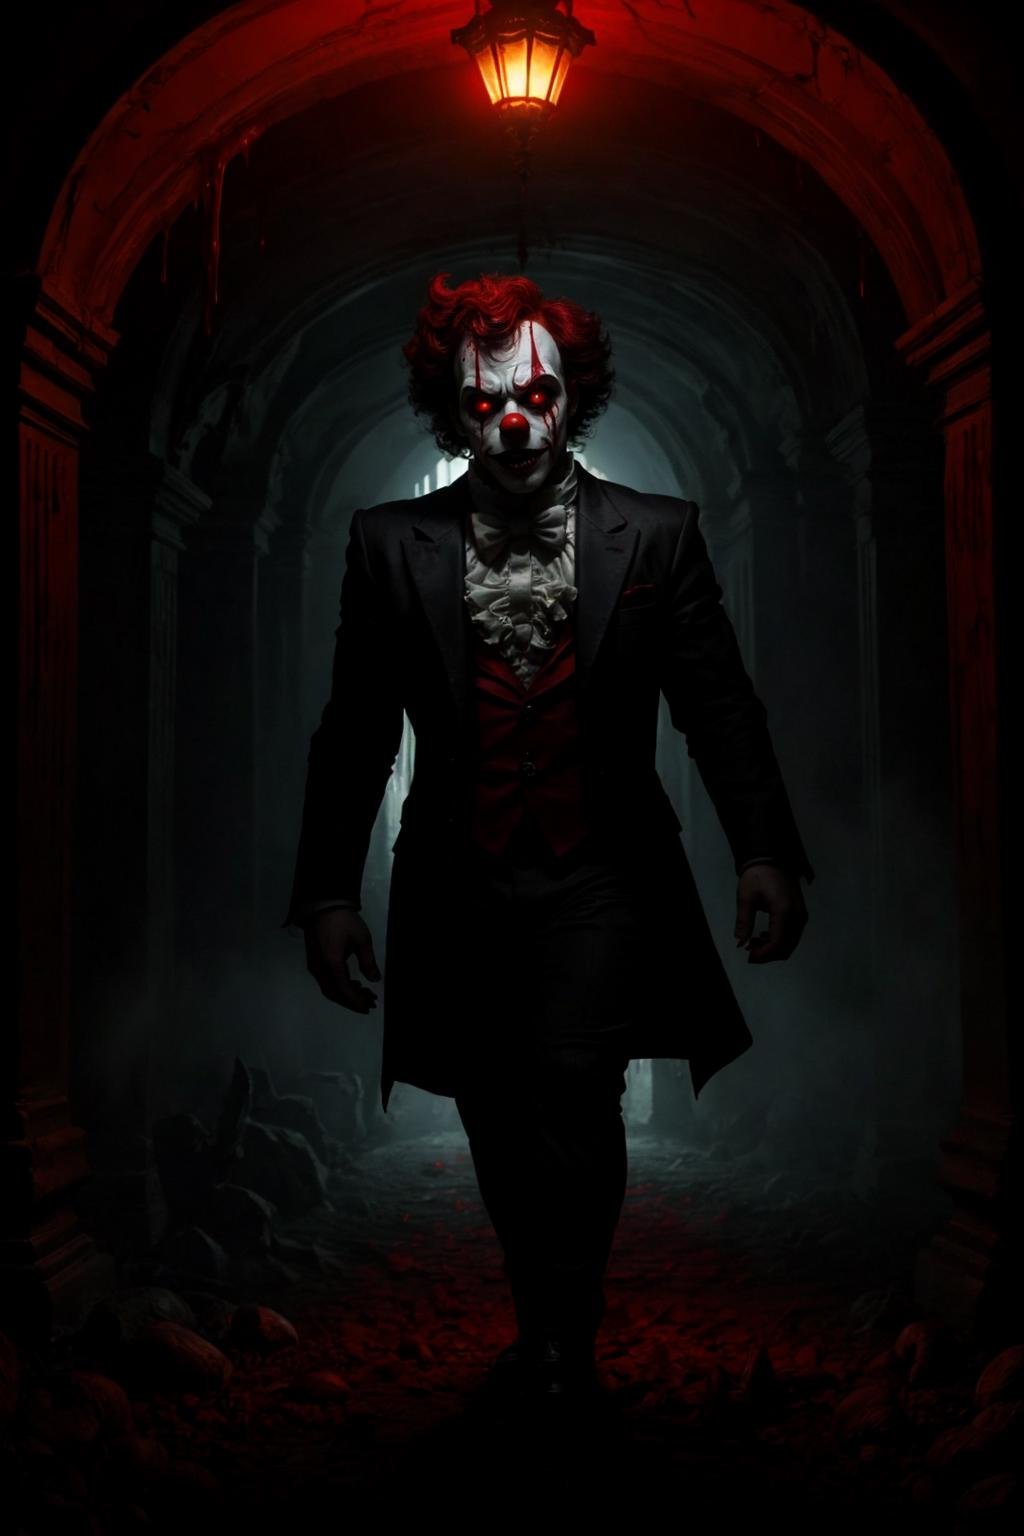 still from a horror movie of, a clown, walking toward viewer, blood dripping, haunted mansion, red eyes, (horror, sinister, suggestive, dramatic lighting),